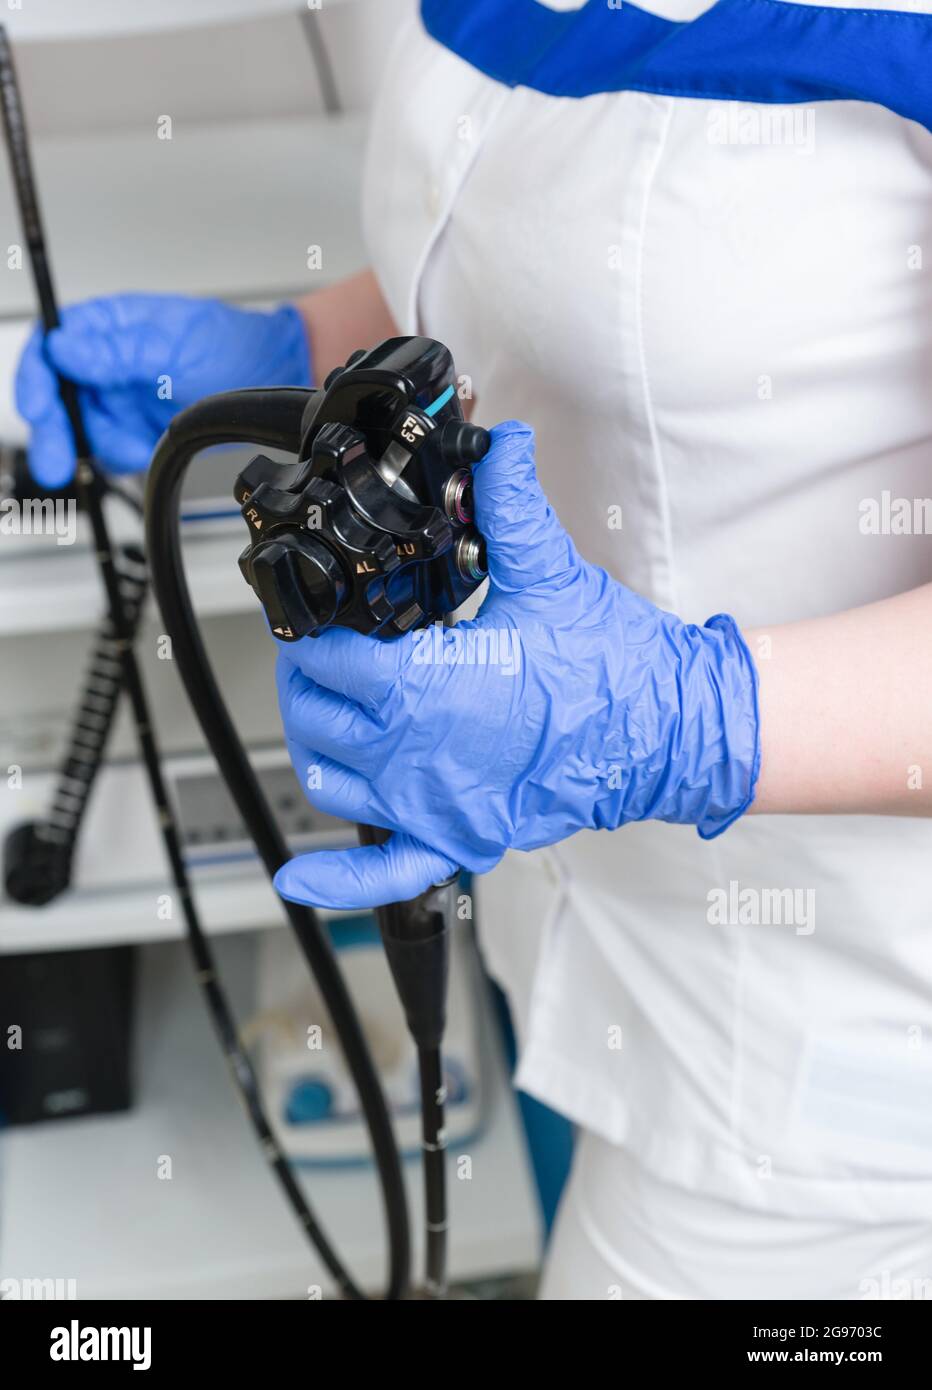 Medical equipment for video esophagogastroduodenoscopy in the hands of blue gloves. Conducting the examination procedure Stock Photo